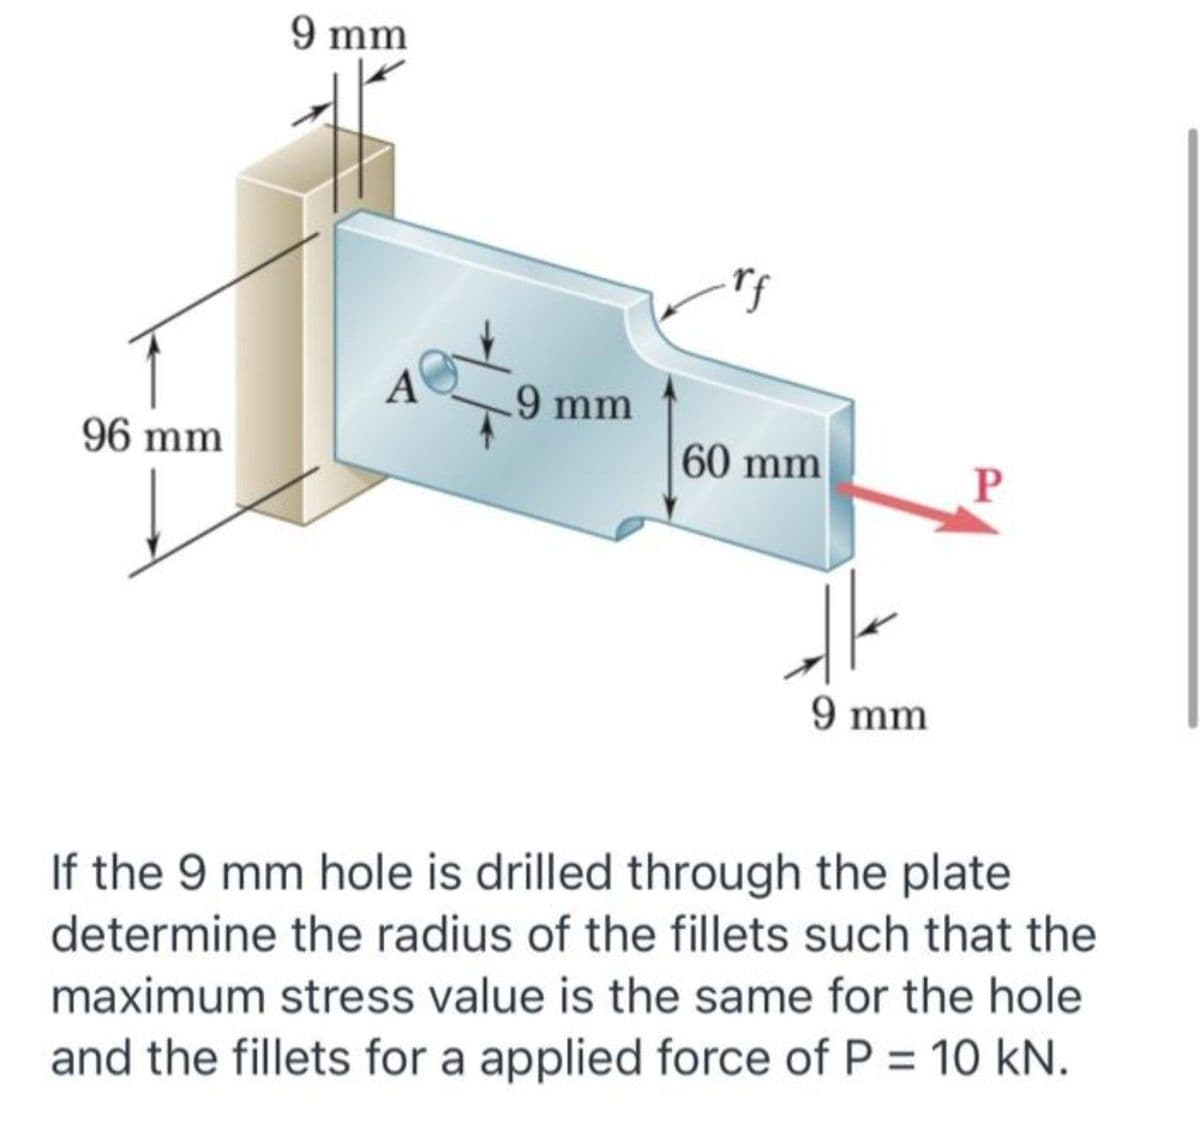 9 mm
A
.9 mm
96 mm
60 mm
P
9 mm
If the 9 mm hole is drilled through the plate
determine the radius of the fillets such that the
maximum stress value is the same for the hole
%3D
and the fillets for a applied force of P = 10 kN.
